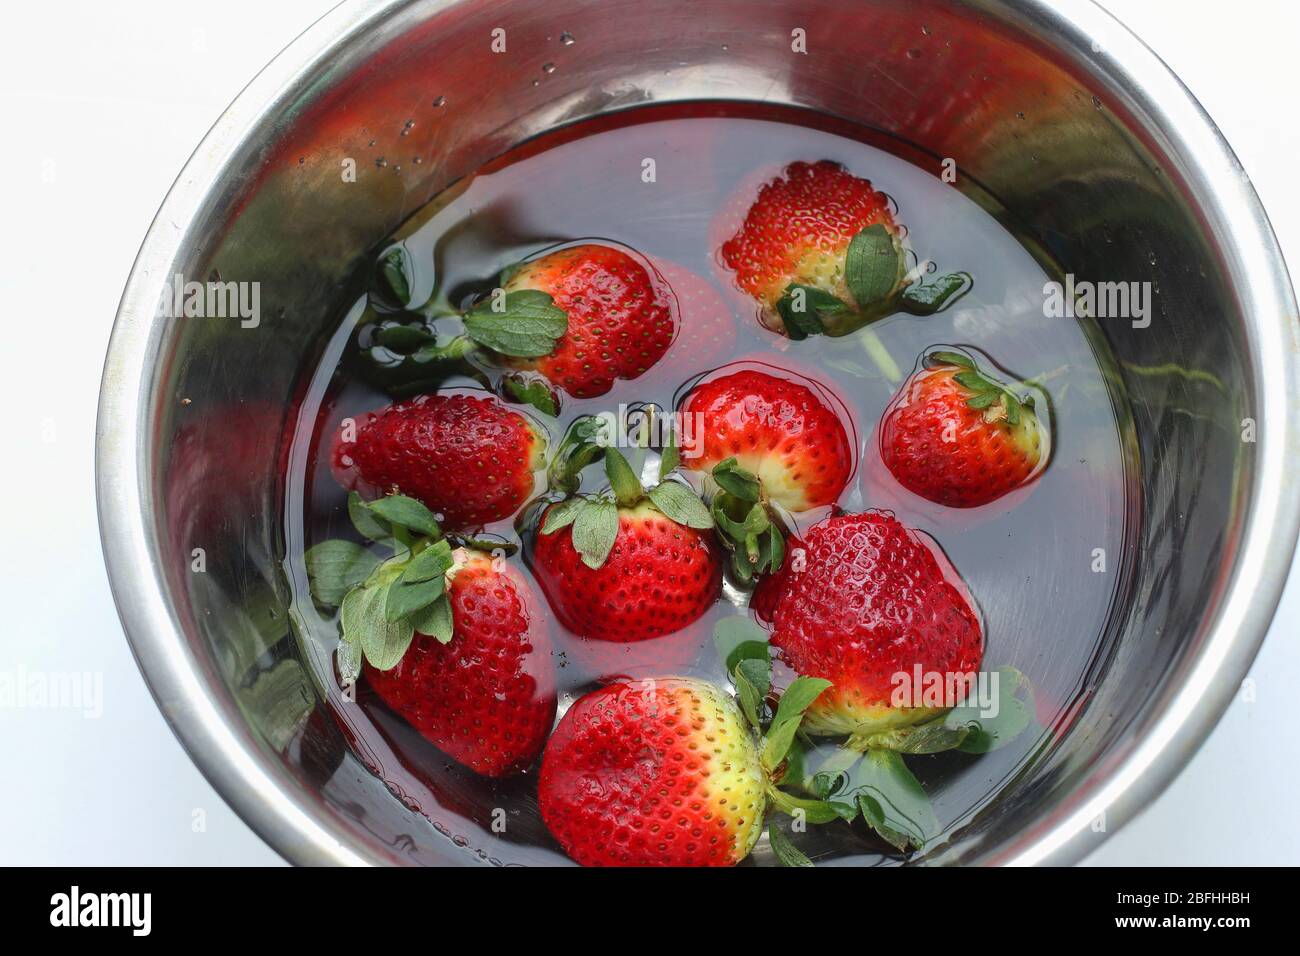 Soaking fresh strawberries in stainless steel bowl isolated on white background Stock Photo